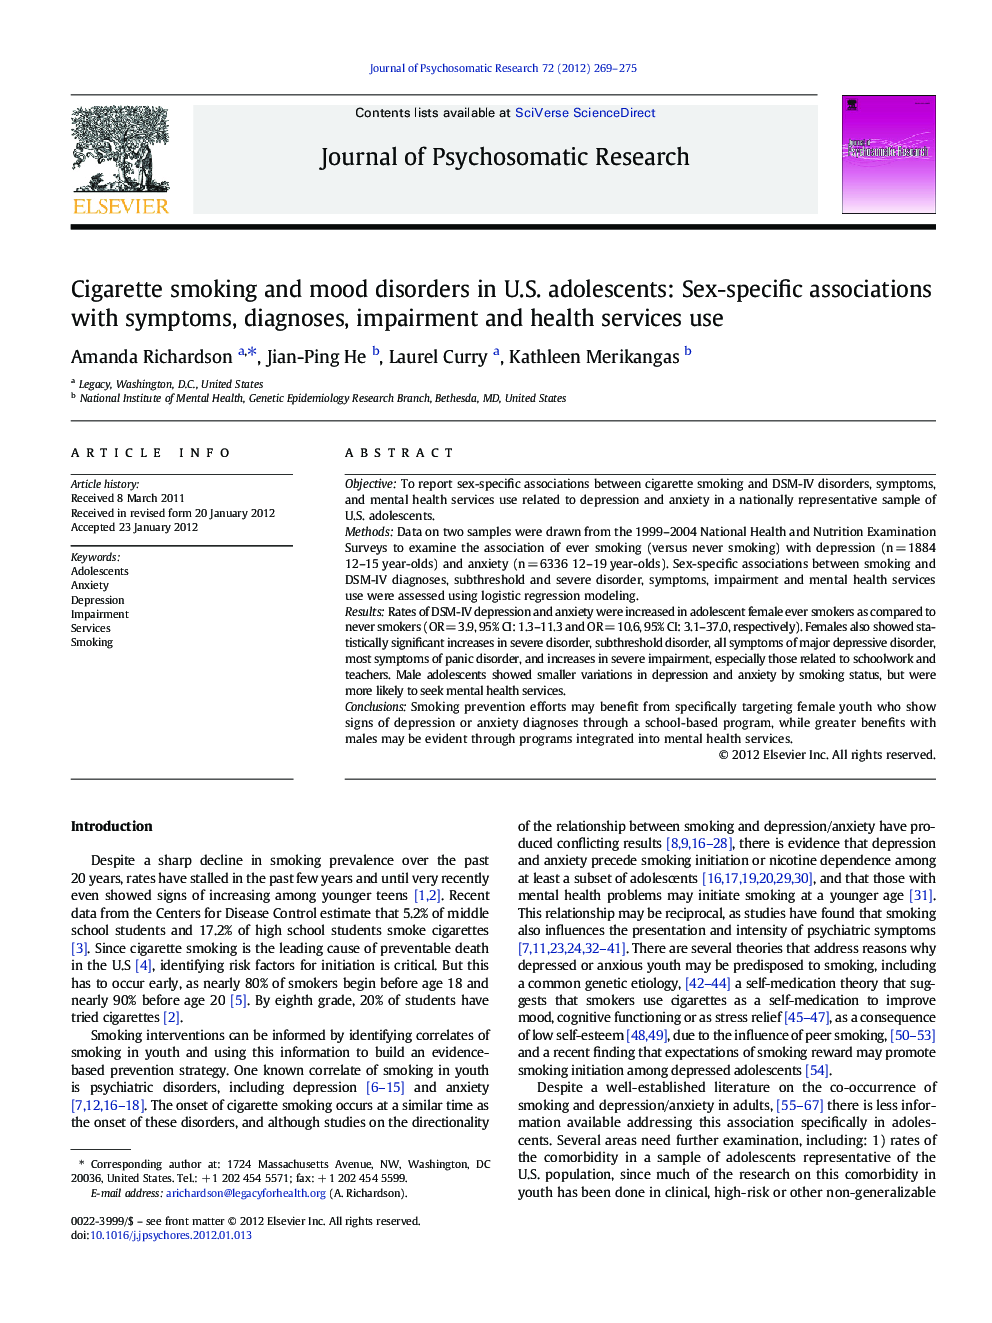 Cigarette smoking and mood disorders in U.S. adolescents: Sex-specific associations with symptoms, diagnoses, impairment and health services use